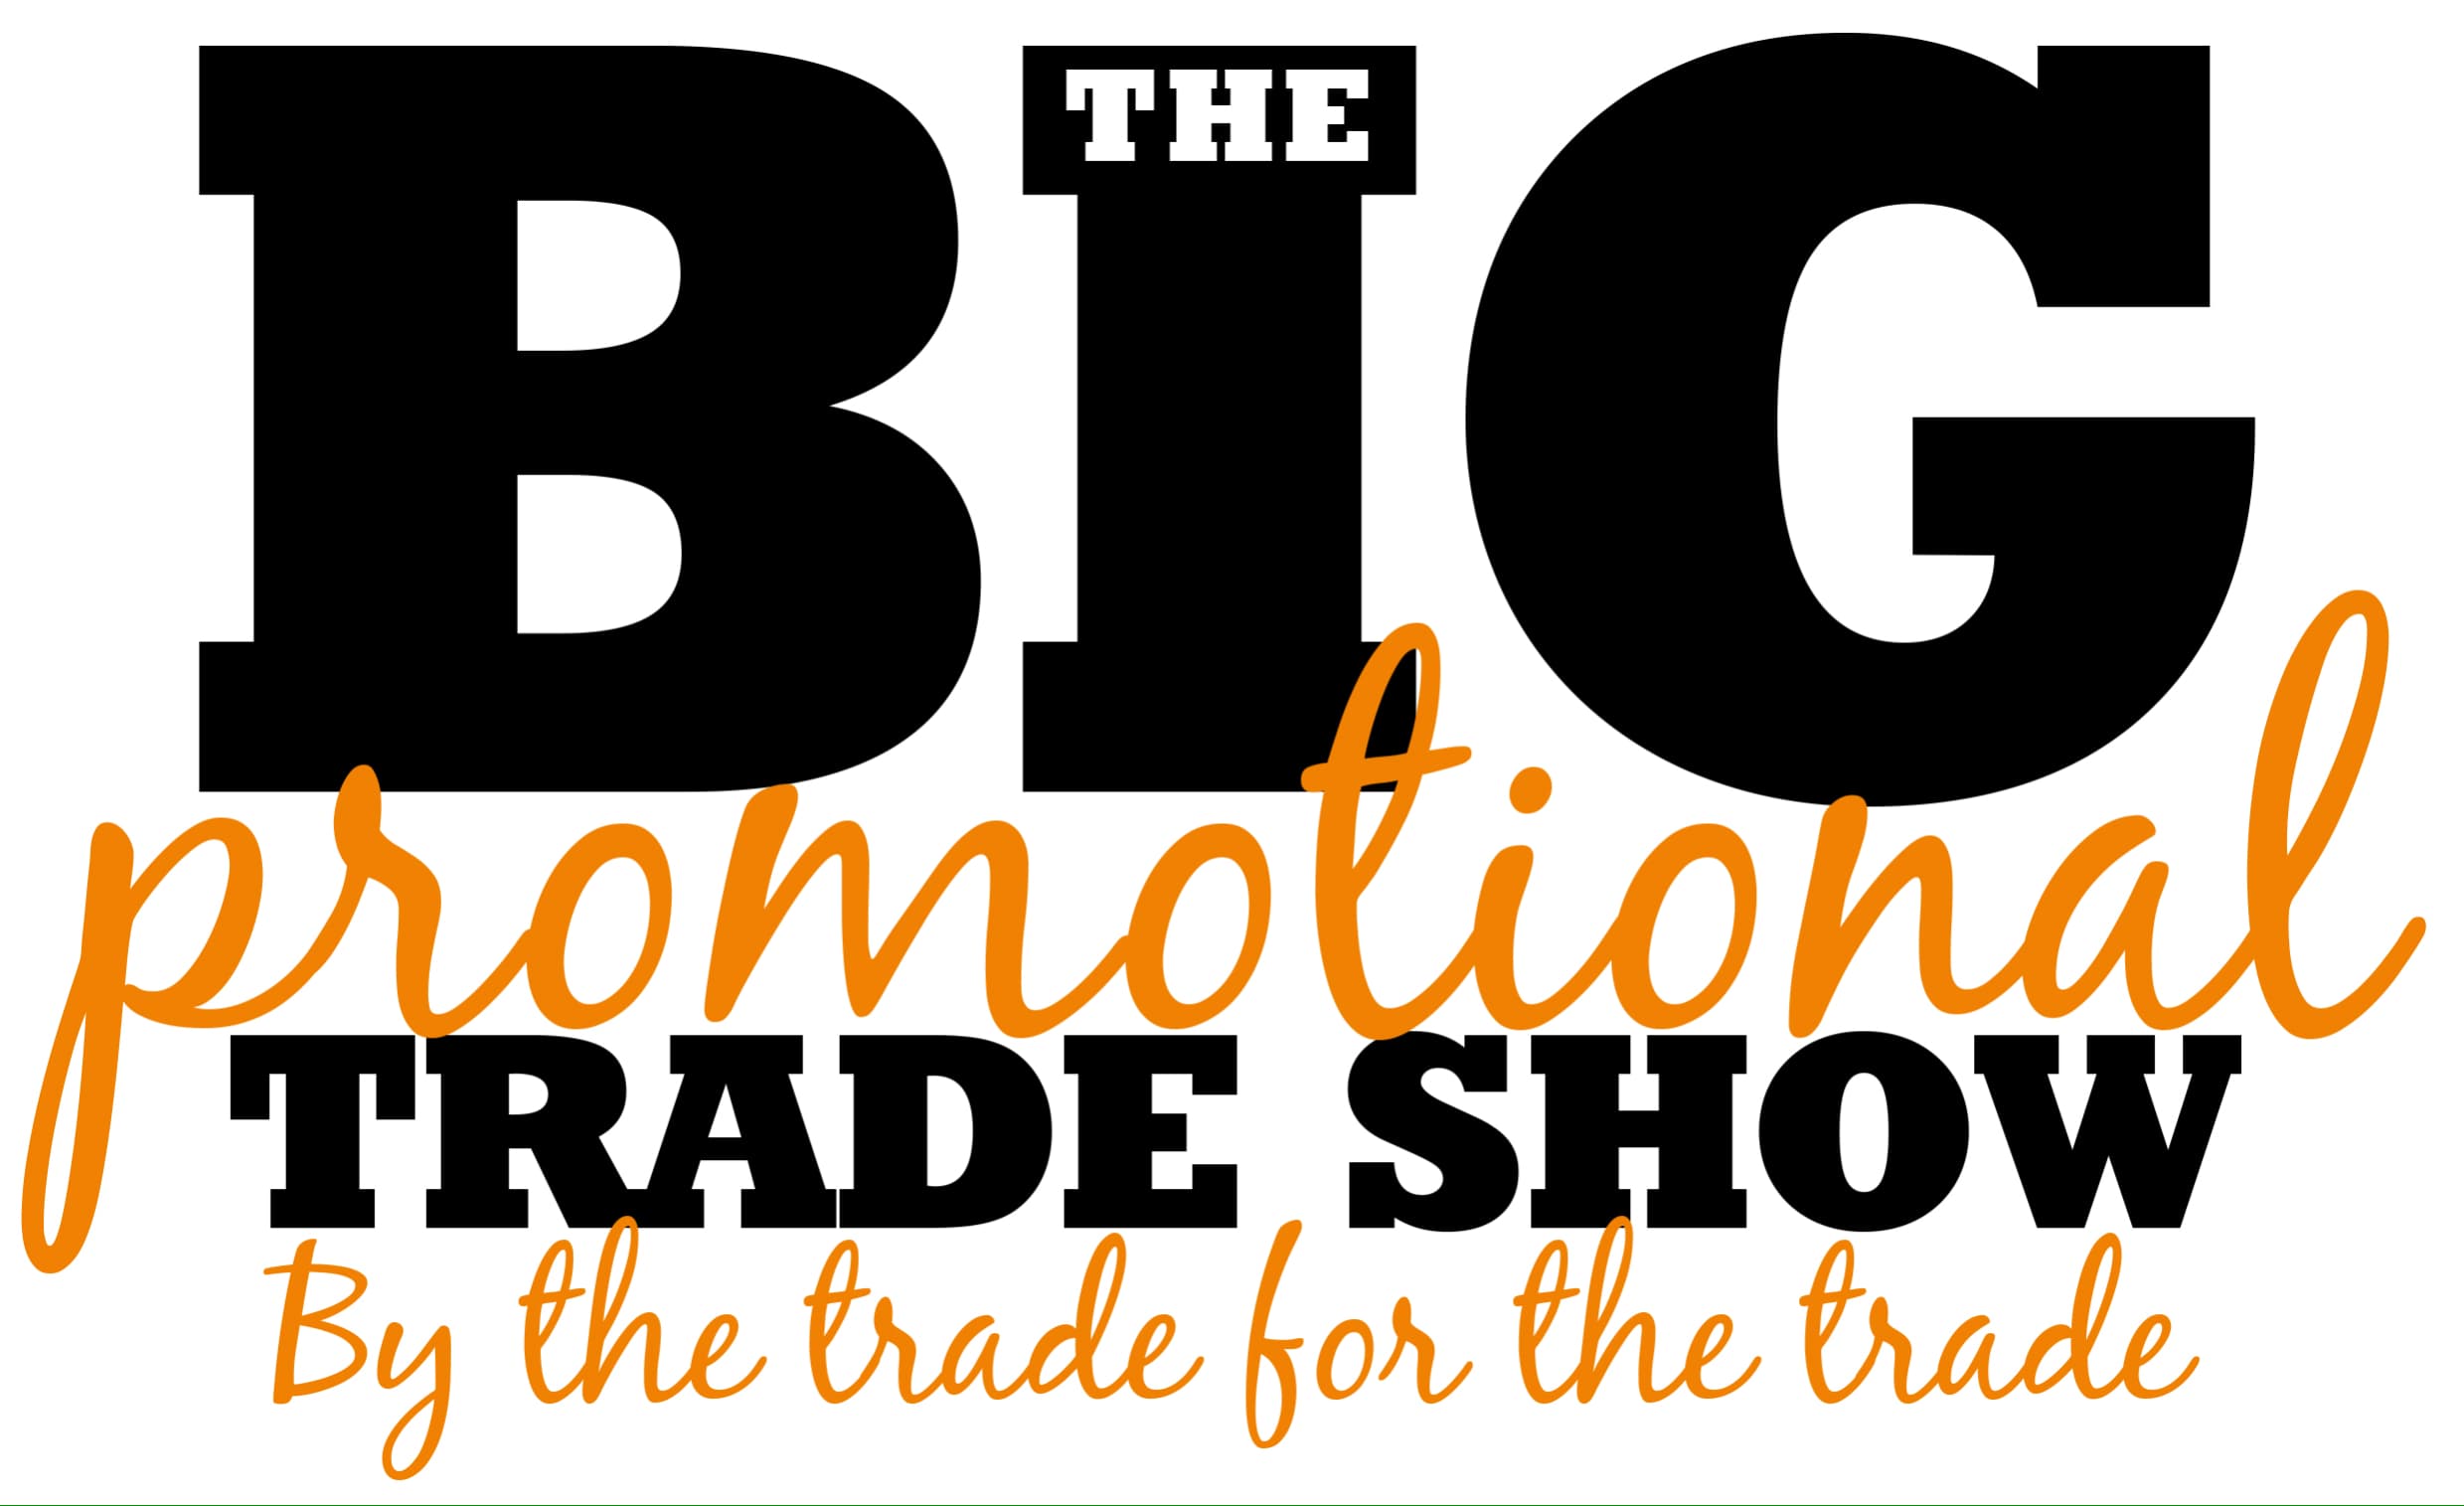 The BIG Promotional Trade Show Presents